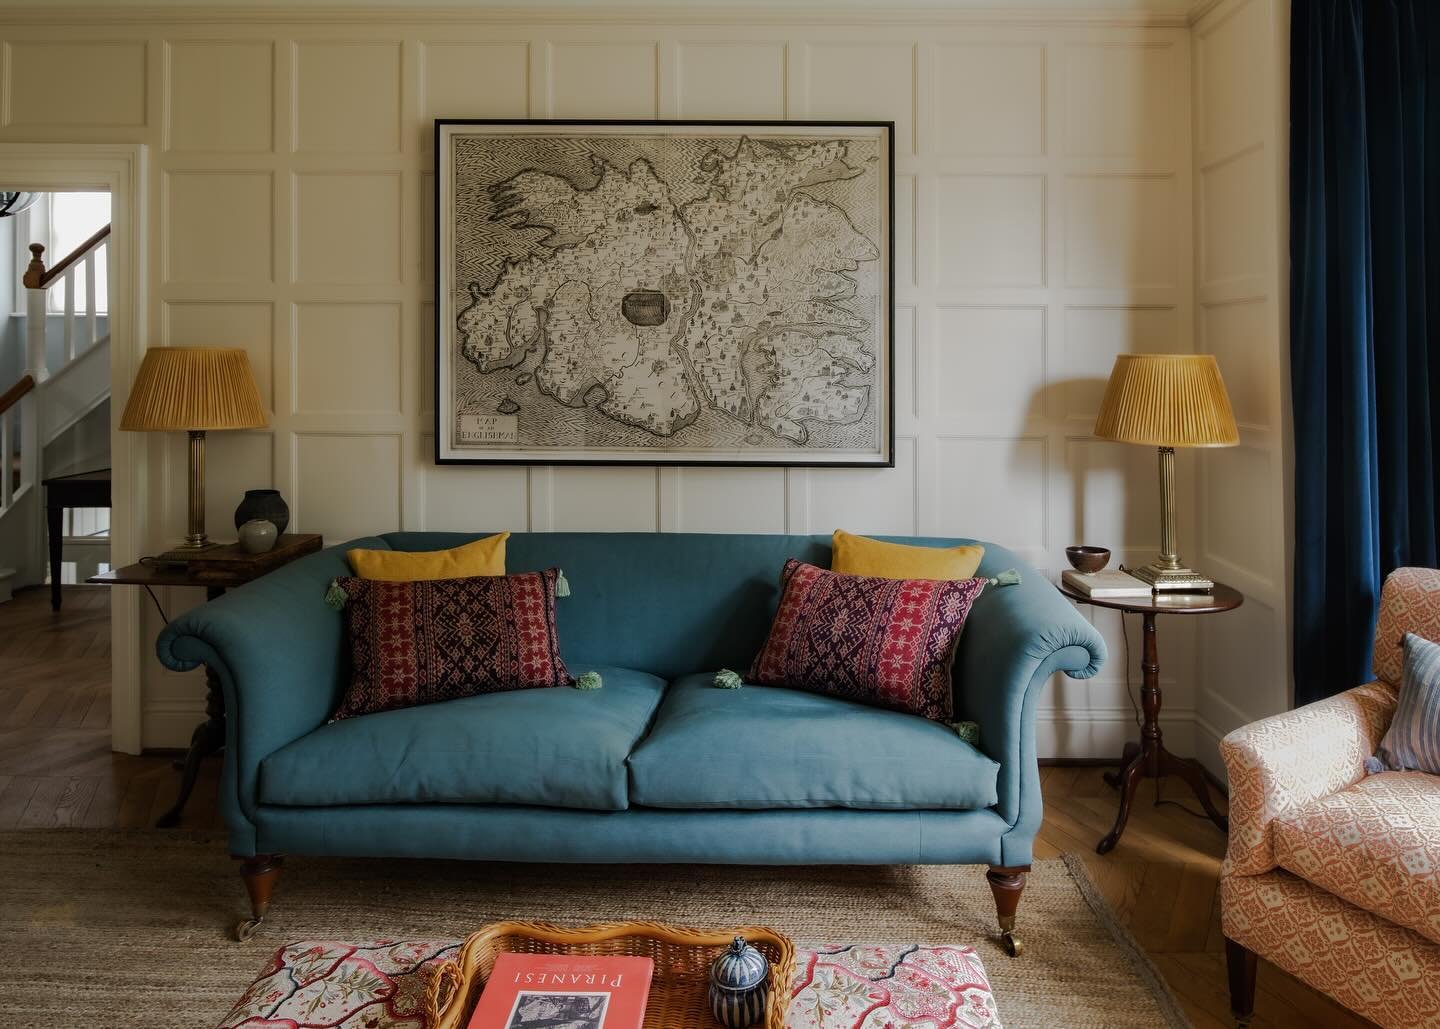 I love this drawing room we panelled and decorated for a favourite client in Oxford last summer. 

Photographed beautiful by @paul_whitbread_photo for an online feature @houseandgardenuk 

Link to full article written beautifully by @elizabethjmetcal